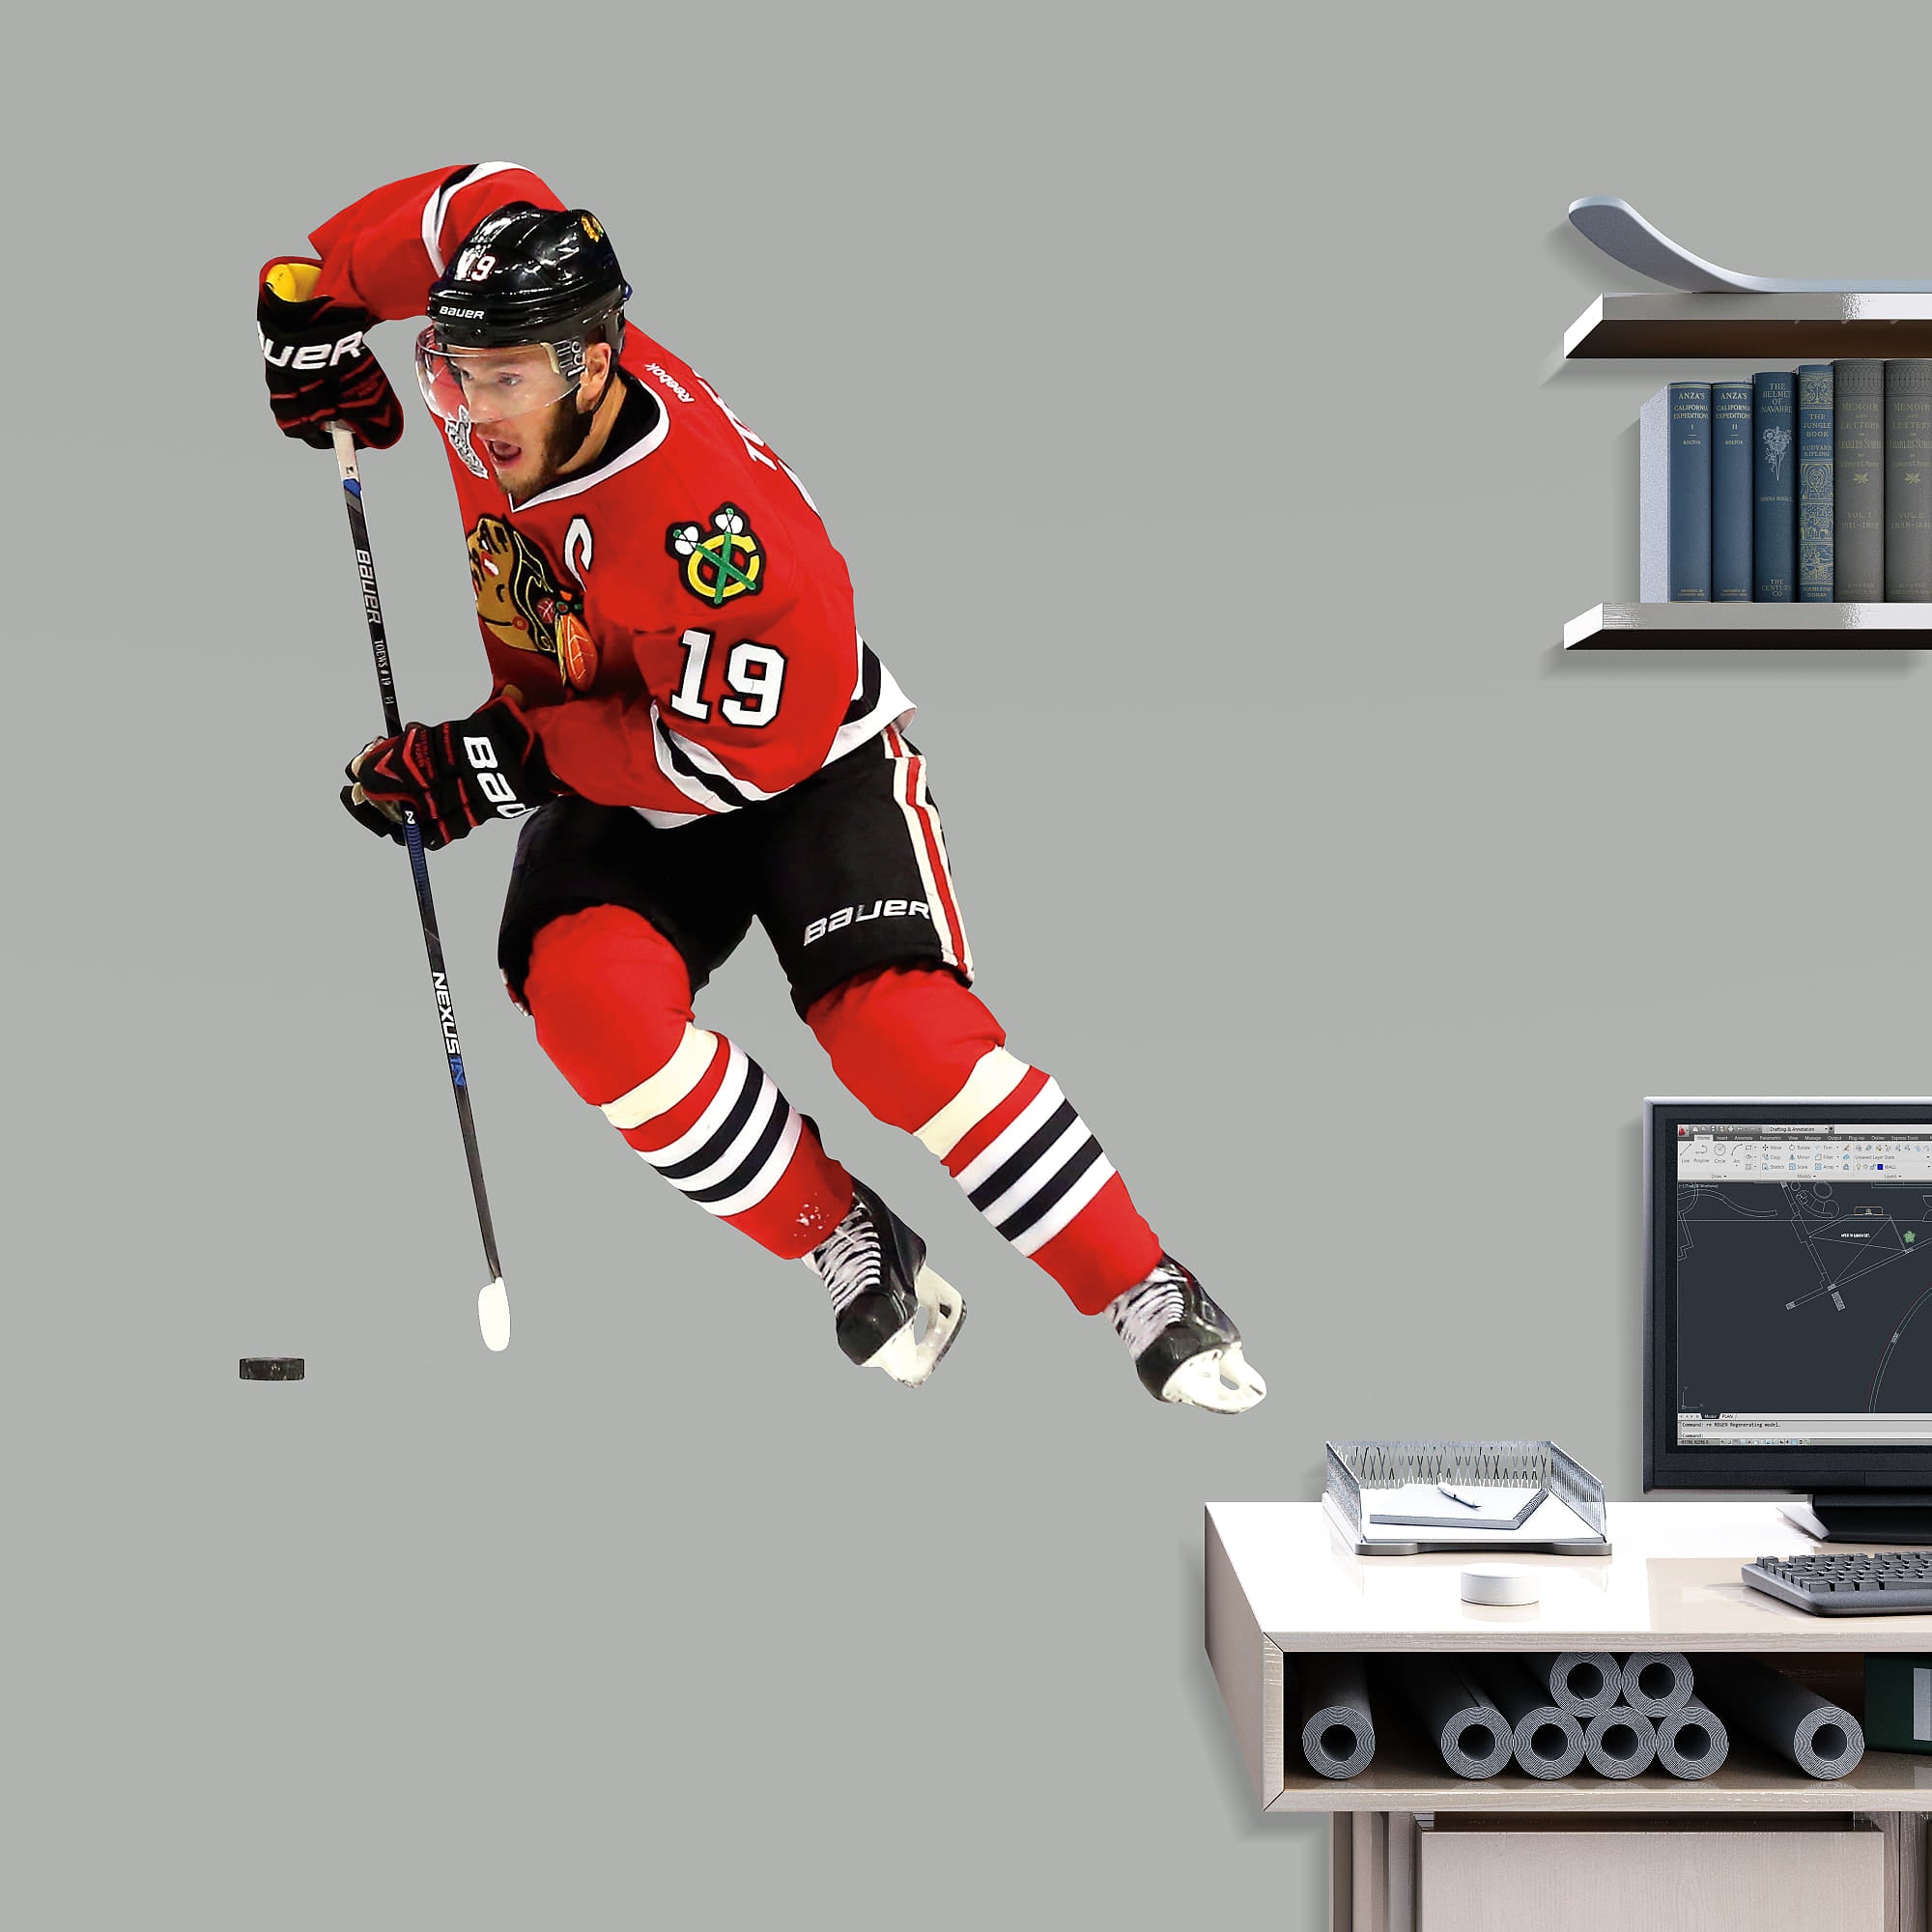 Jonathan Toews for Chicago Blackhawks: 2015 Stanley Cup - Officially Licensed NHL Removable Wall Decal 27.0"W x 34.0"H by Fathea